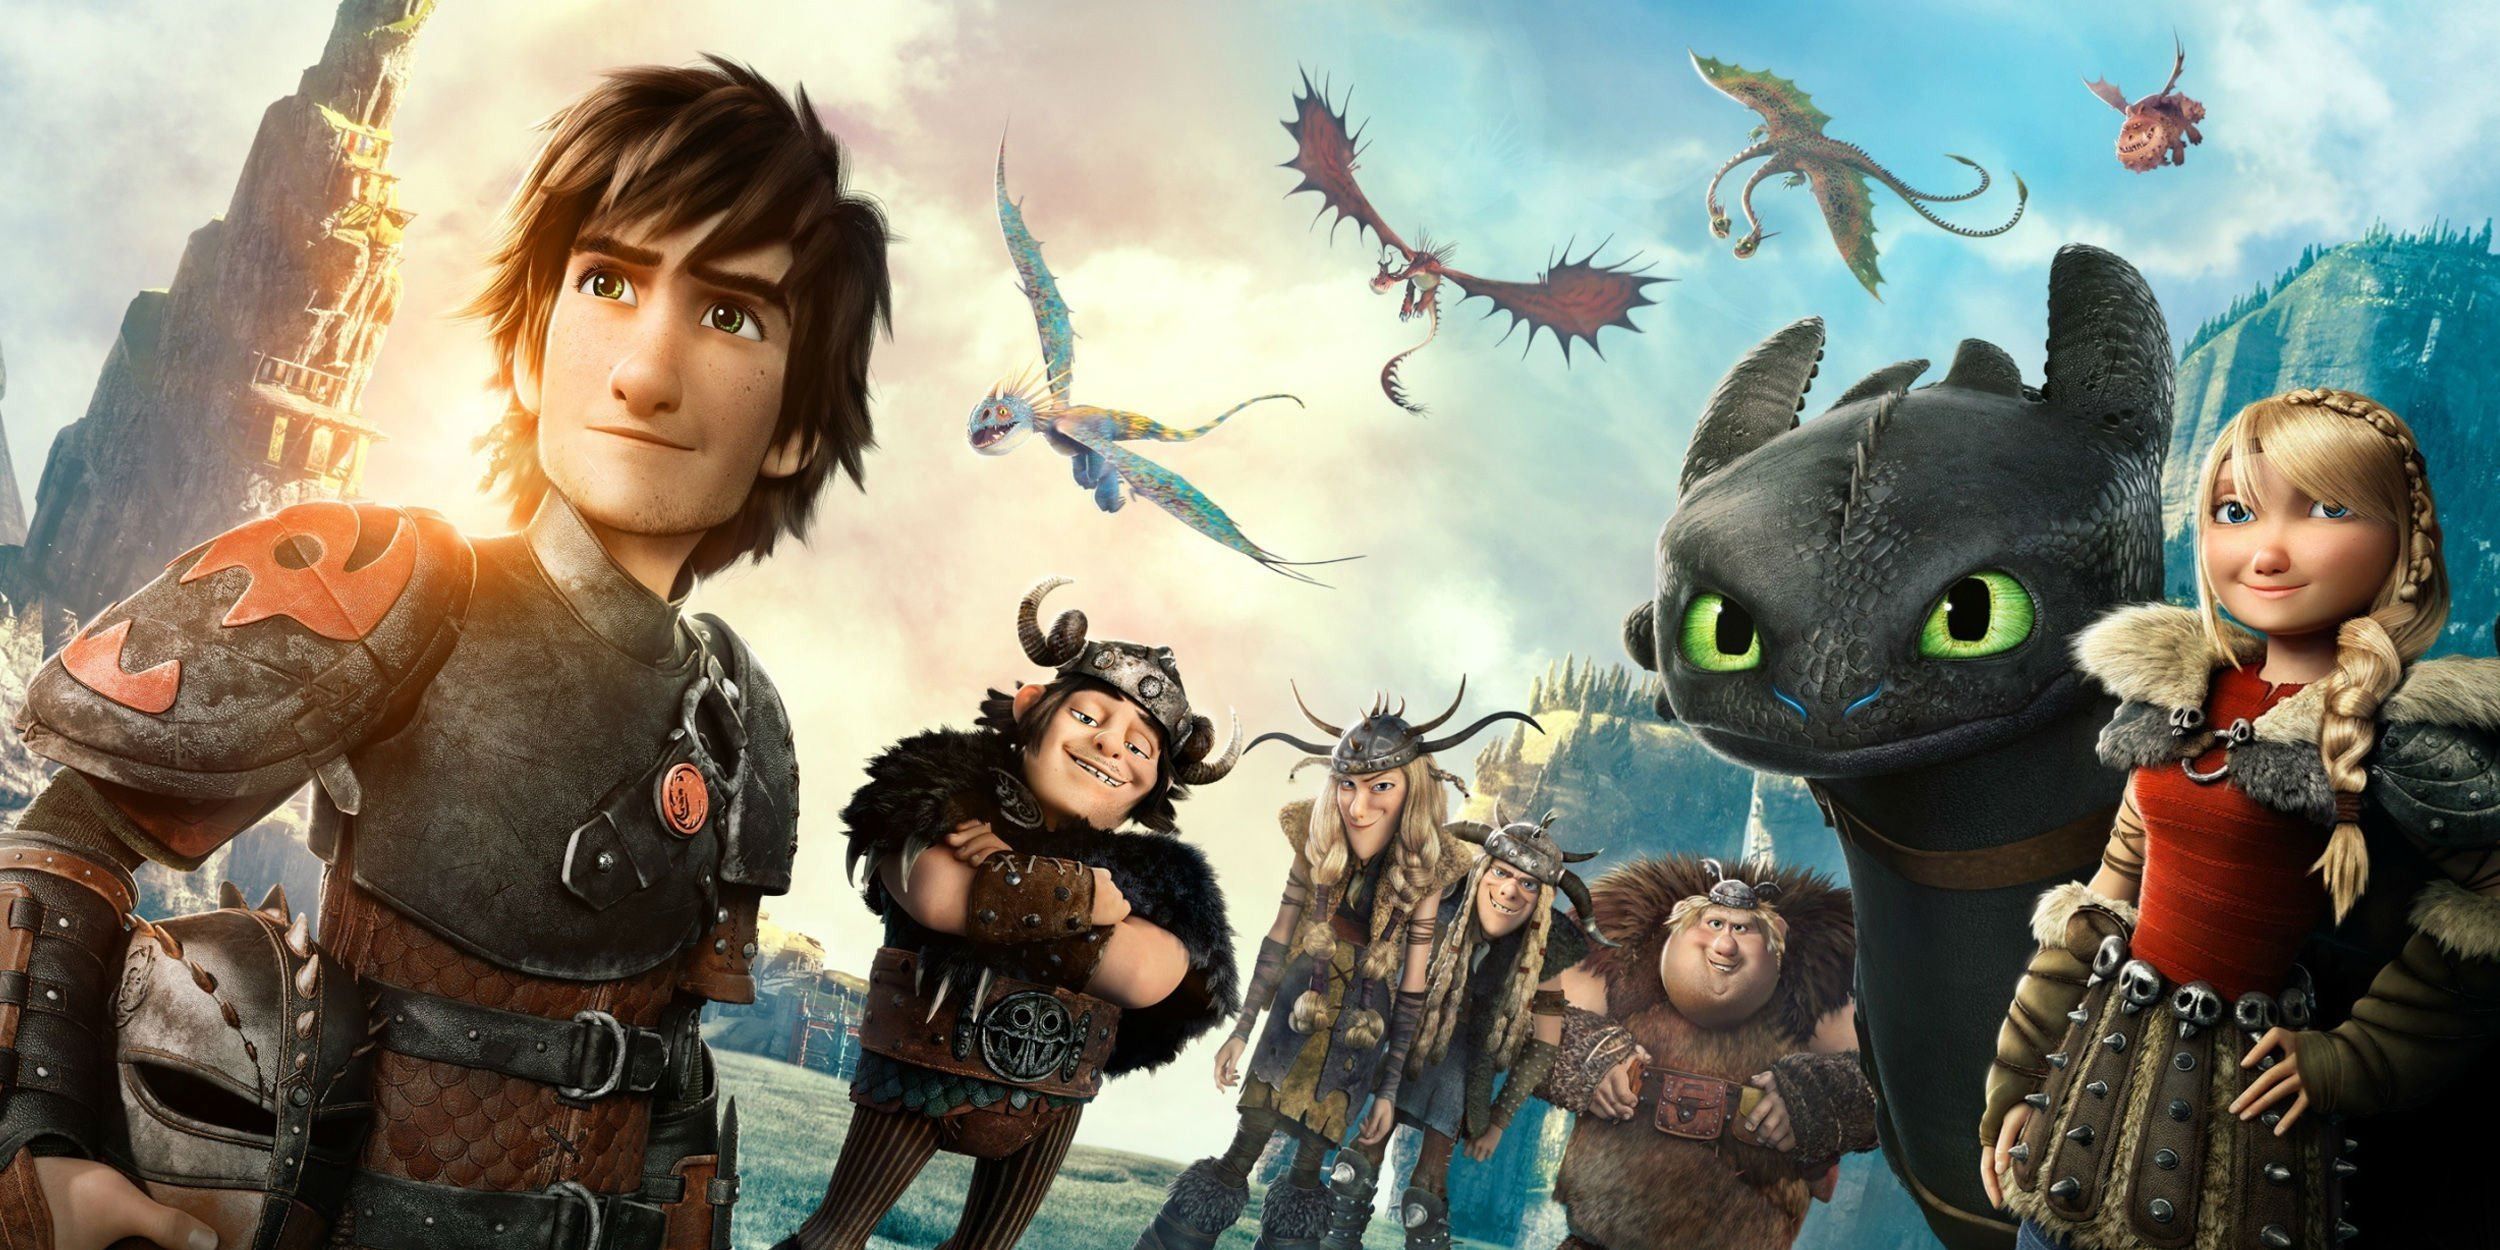 How To Train Your Dragon cast